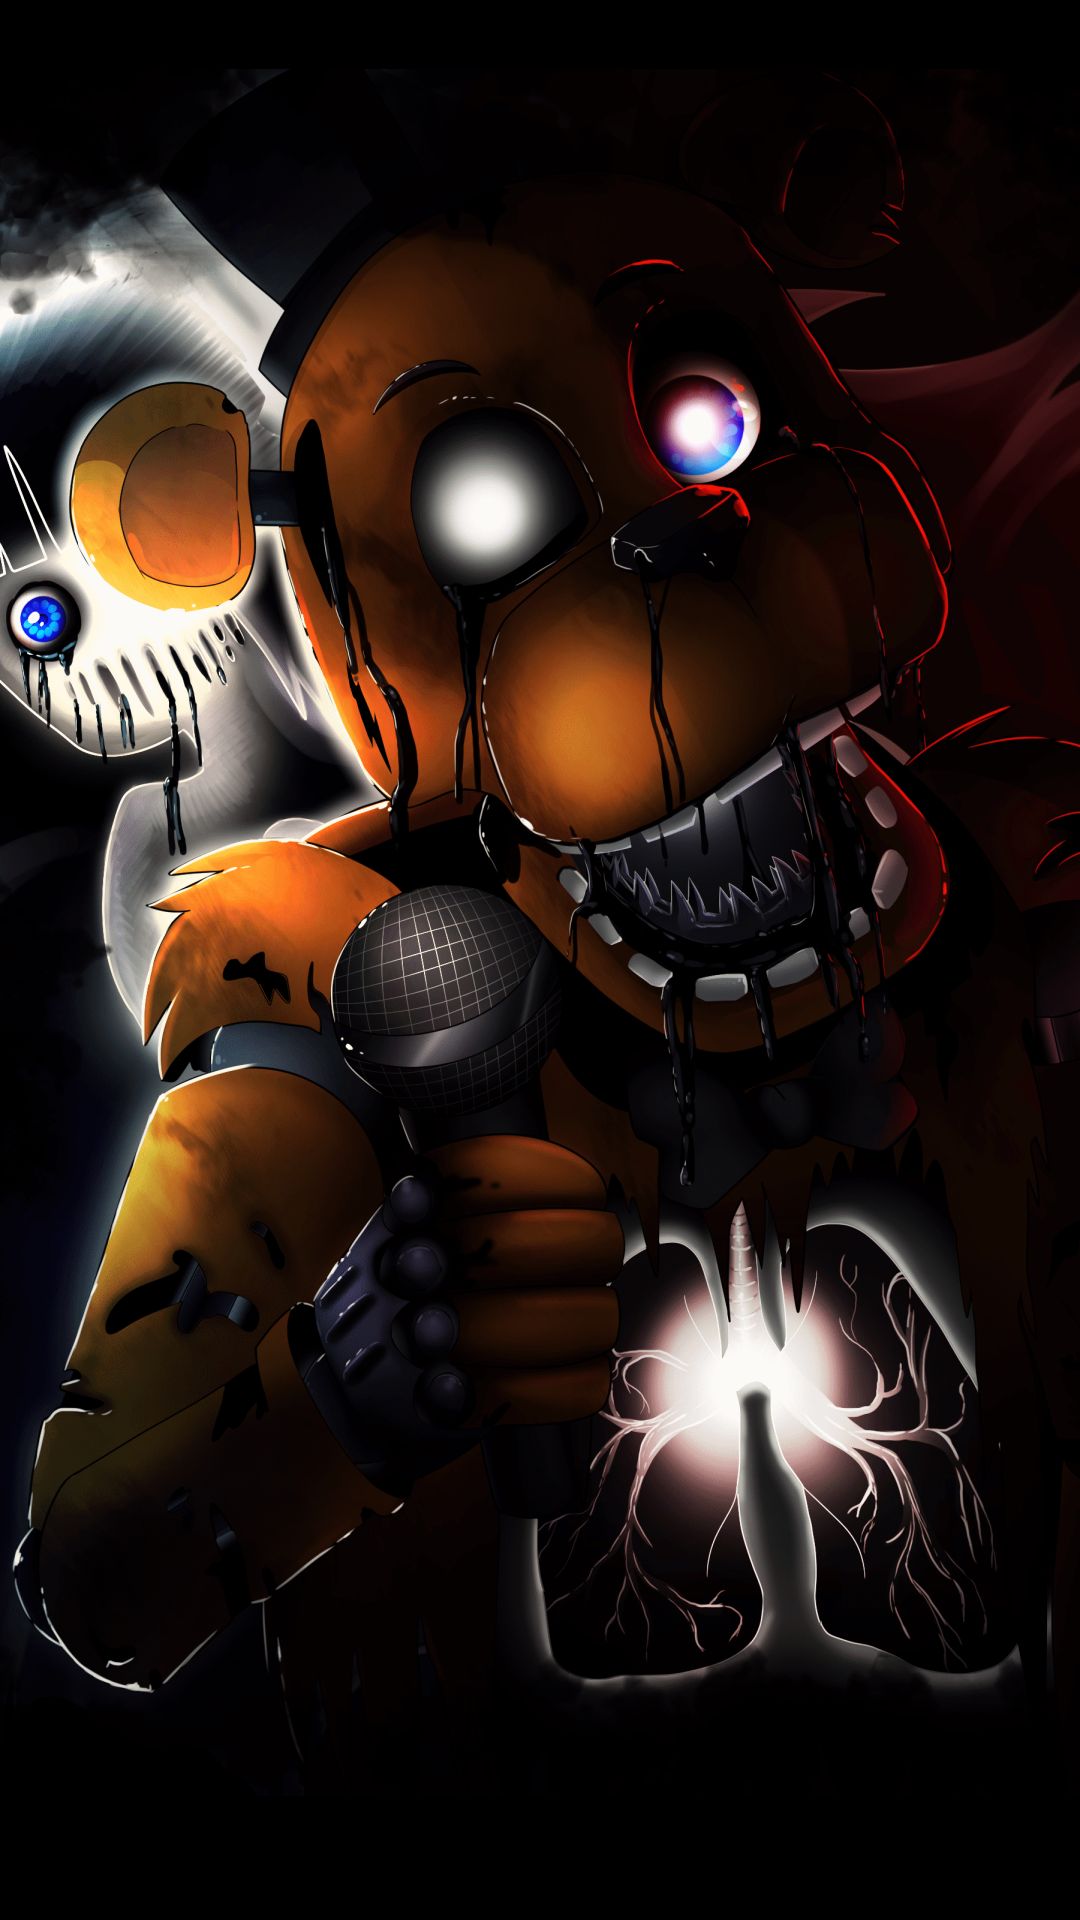 chica (five nights at freddy's), foxy (five nights at freddy's), video game, five nights at freddy's 4, bonnie (five nights at freddy's), freddy (five nights at freddy's), five nights at freddy's